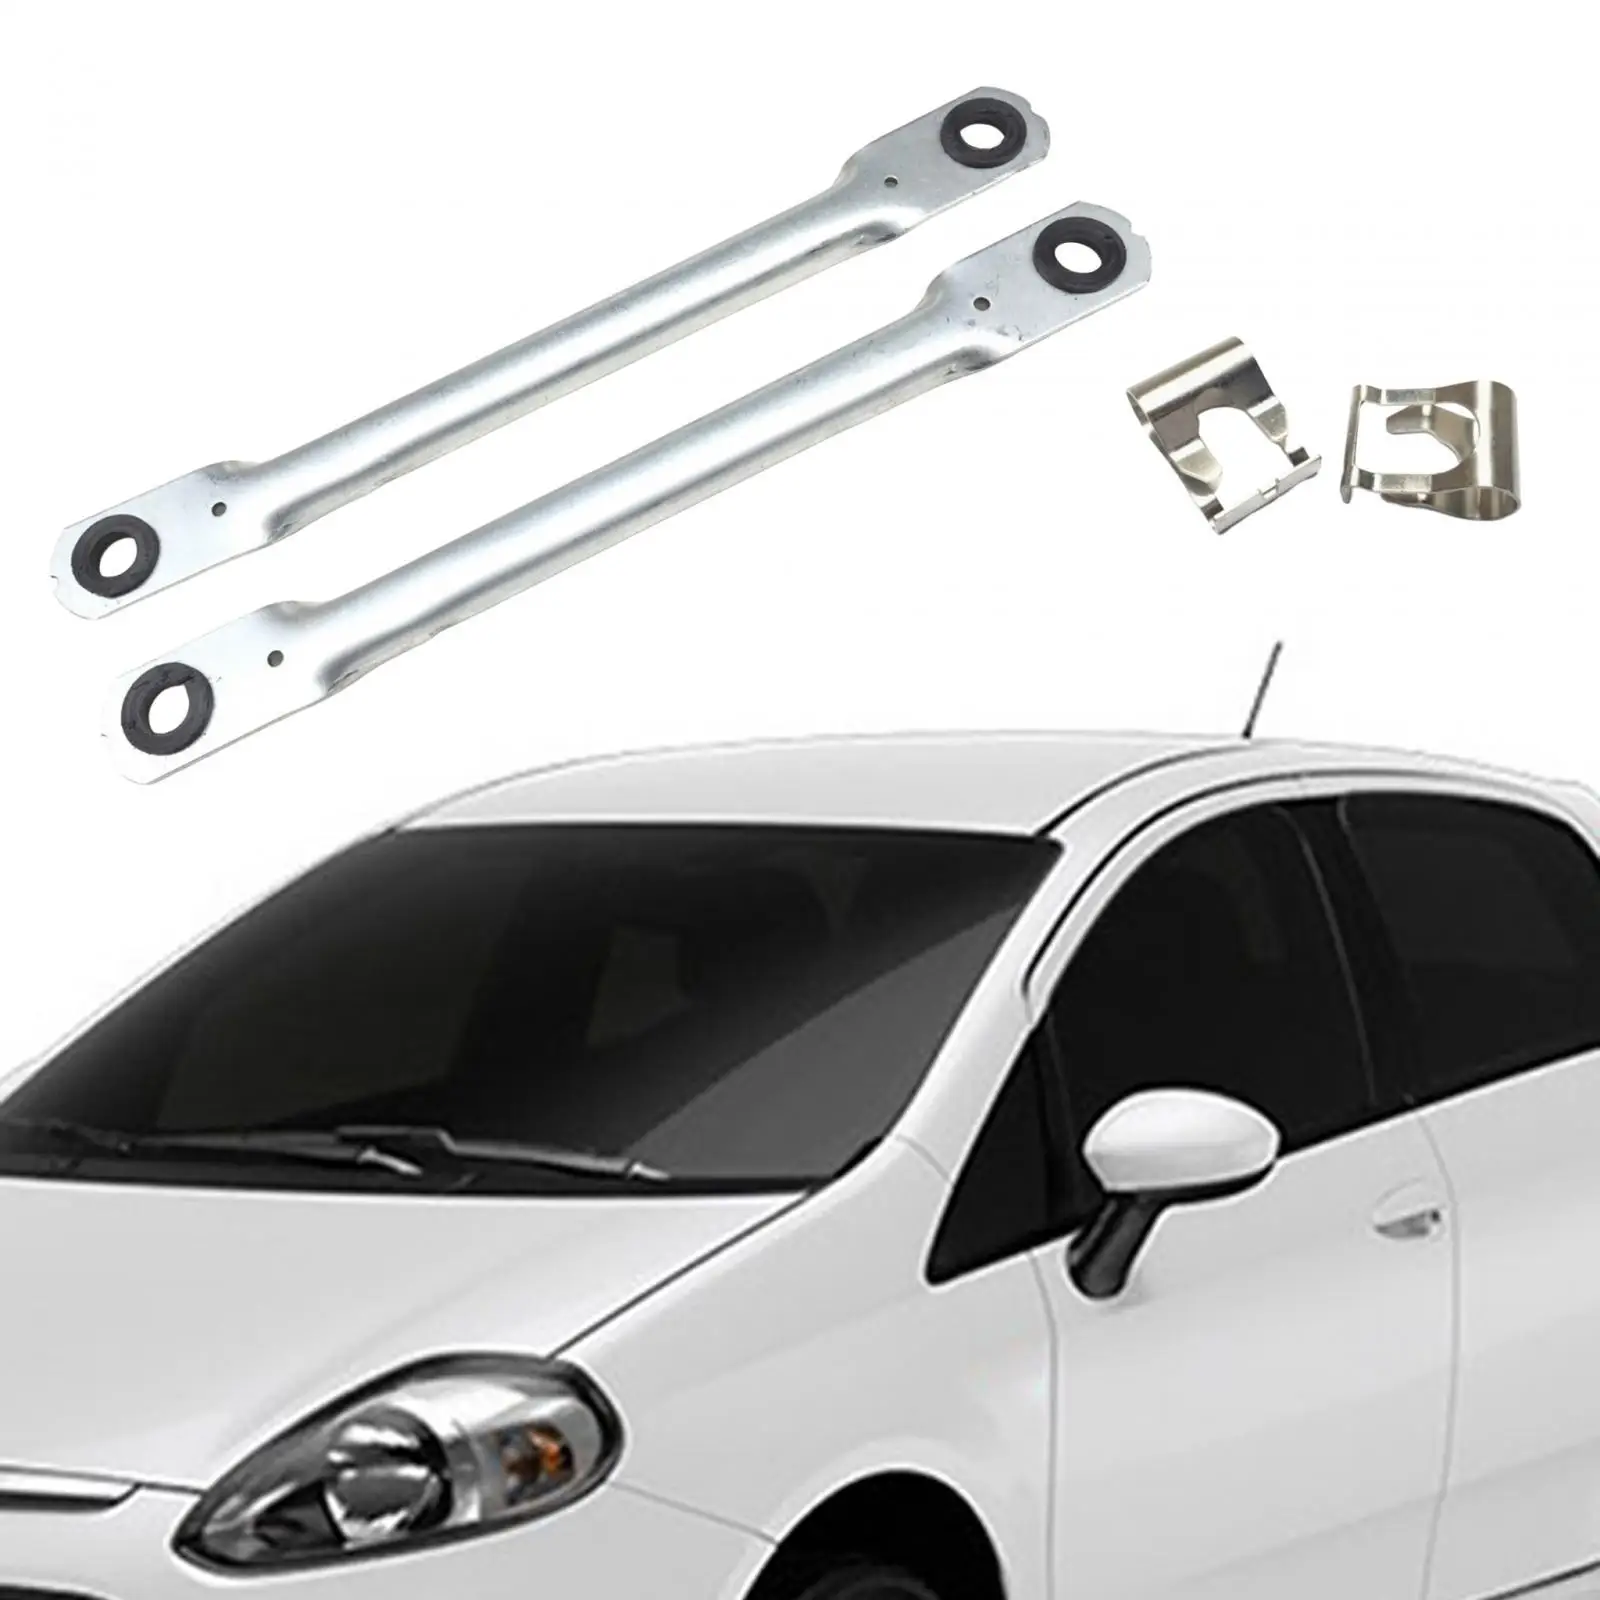 Wiper Linkage Replacement High Performance Durable Car Accessories Car